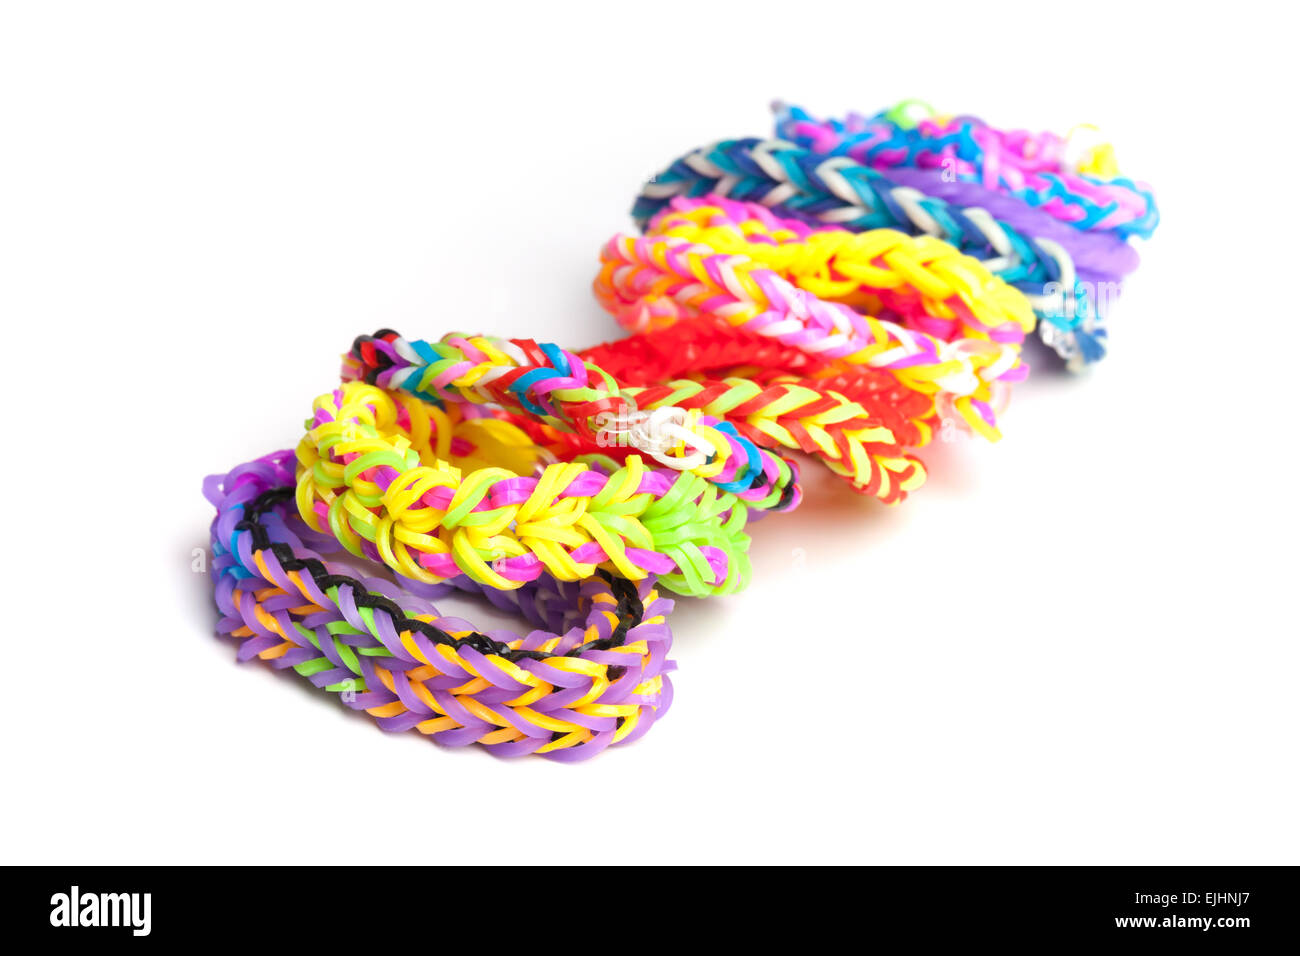 Colorful rubber band bracelets isolated on white, trendy kids fashion accessories Stock Photo